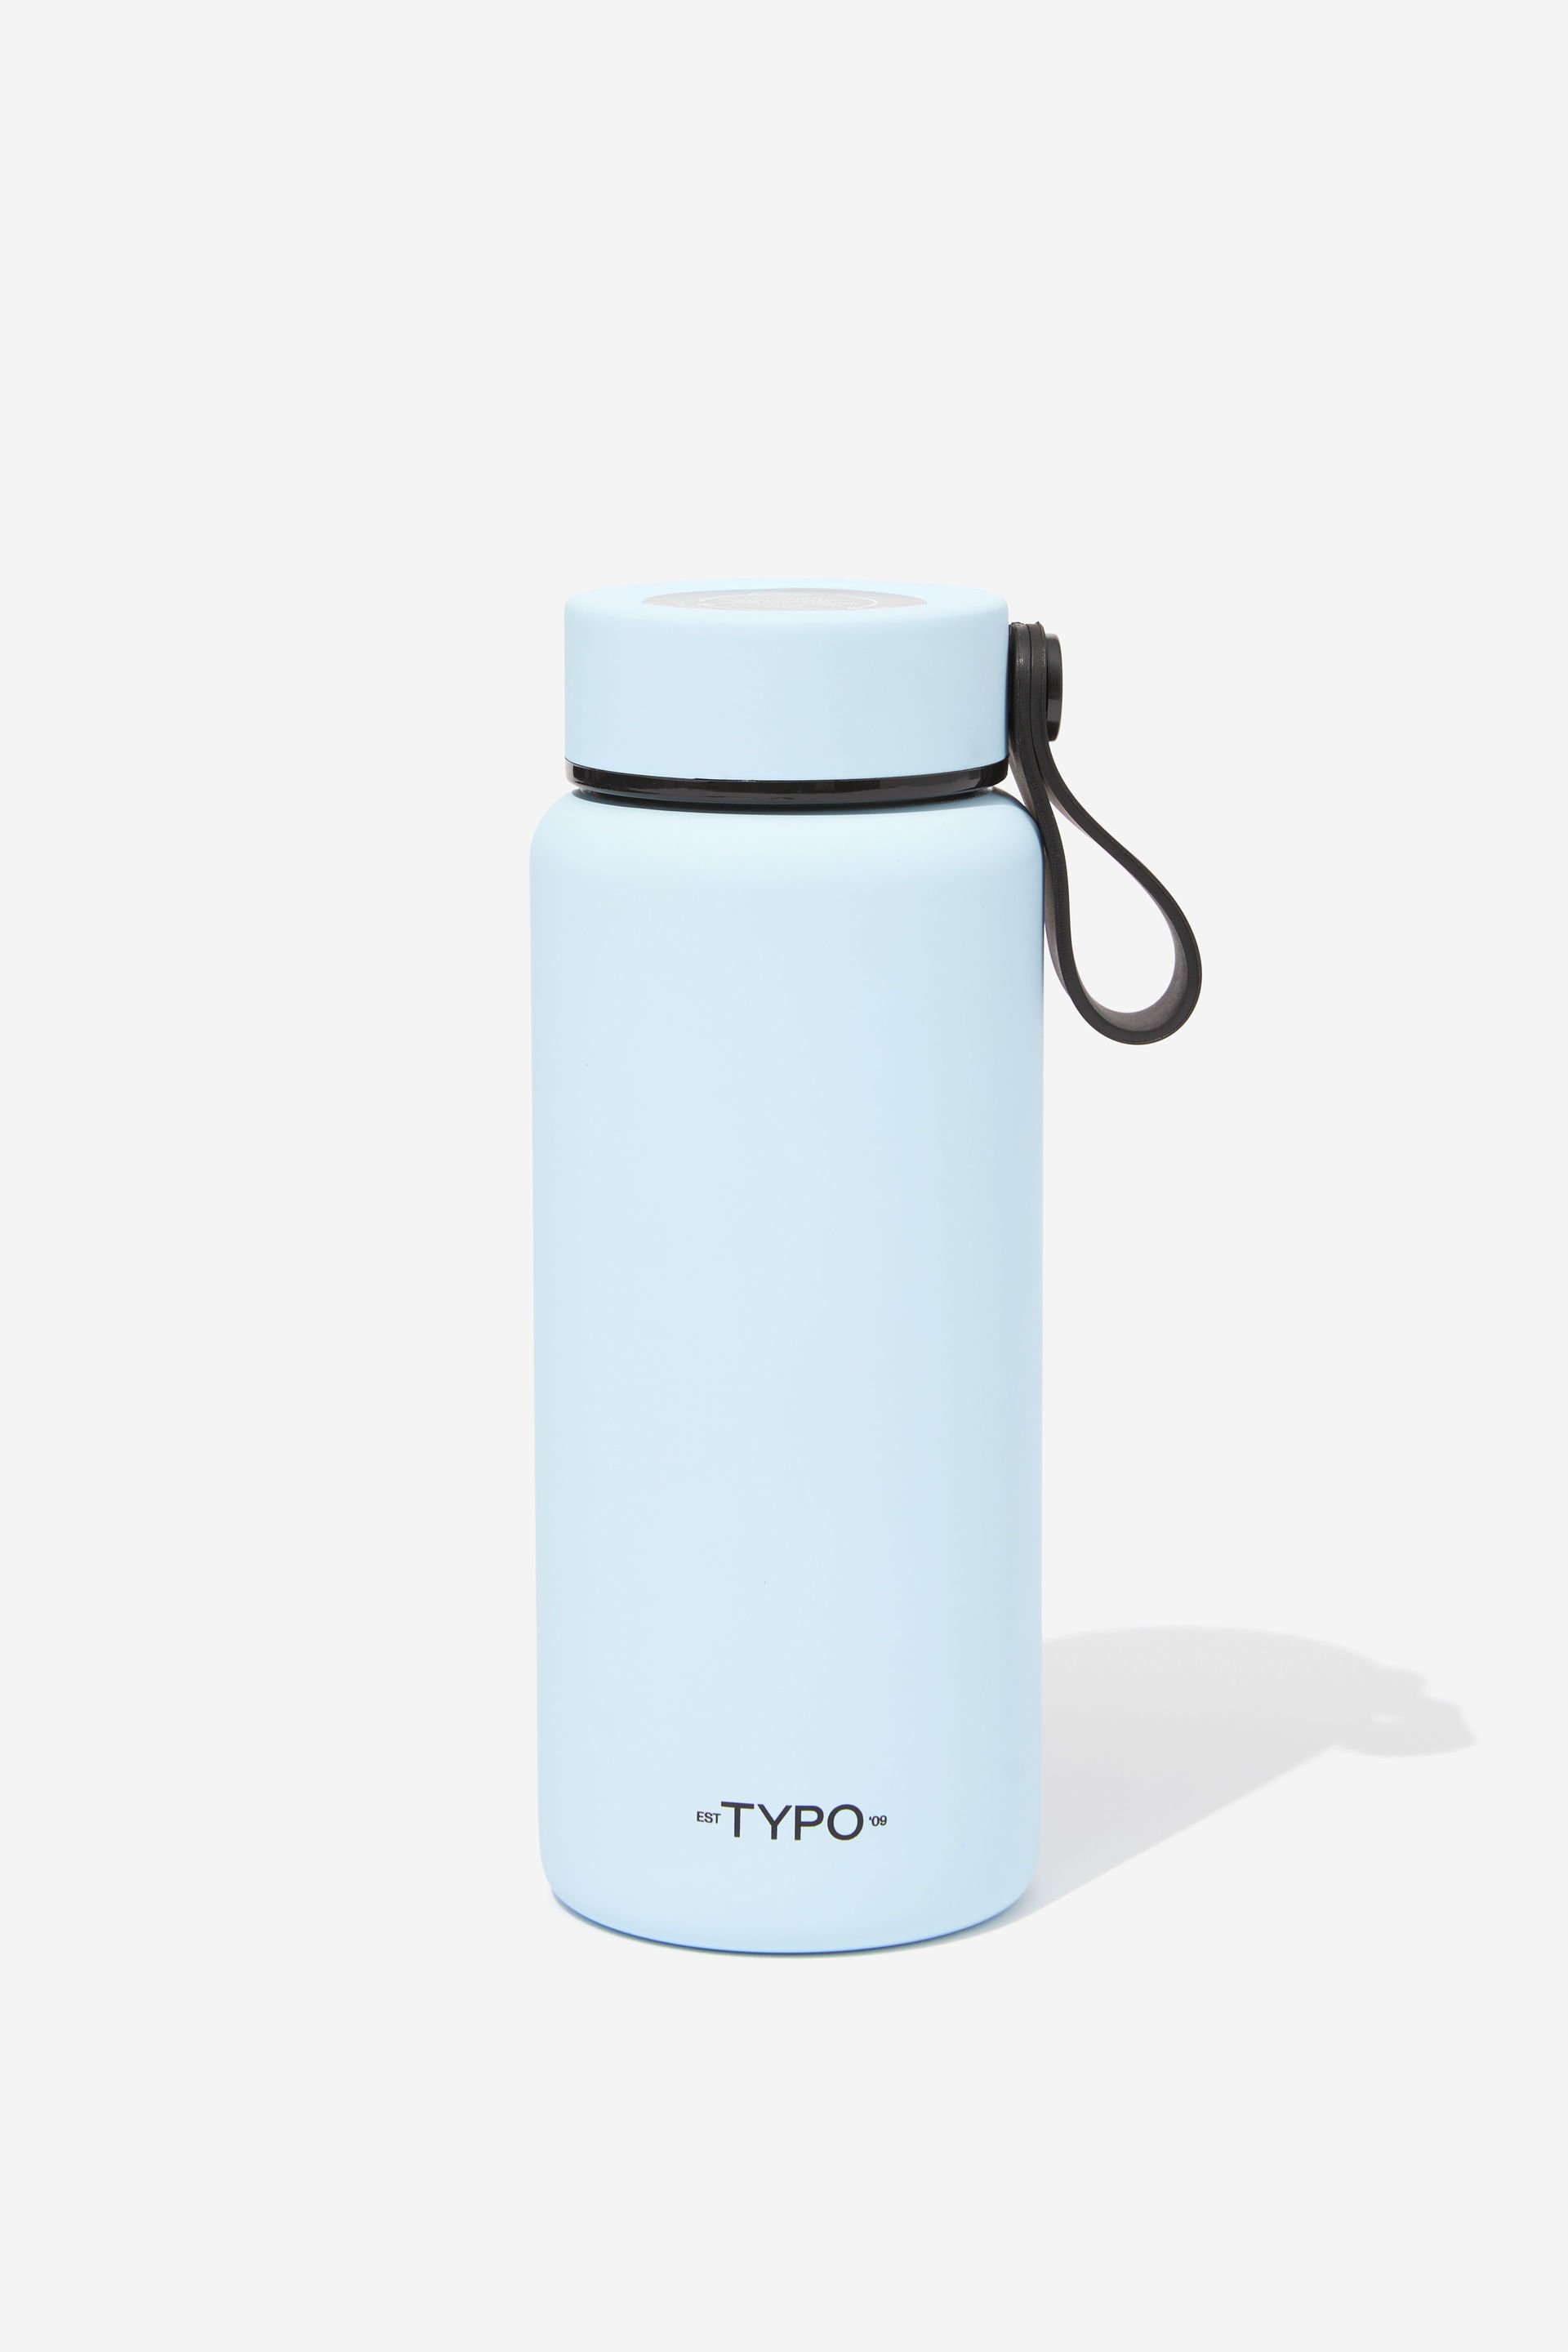 Typo - On The Move Drink Bottle 350ML 2.0 - Arctic blue